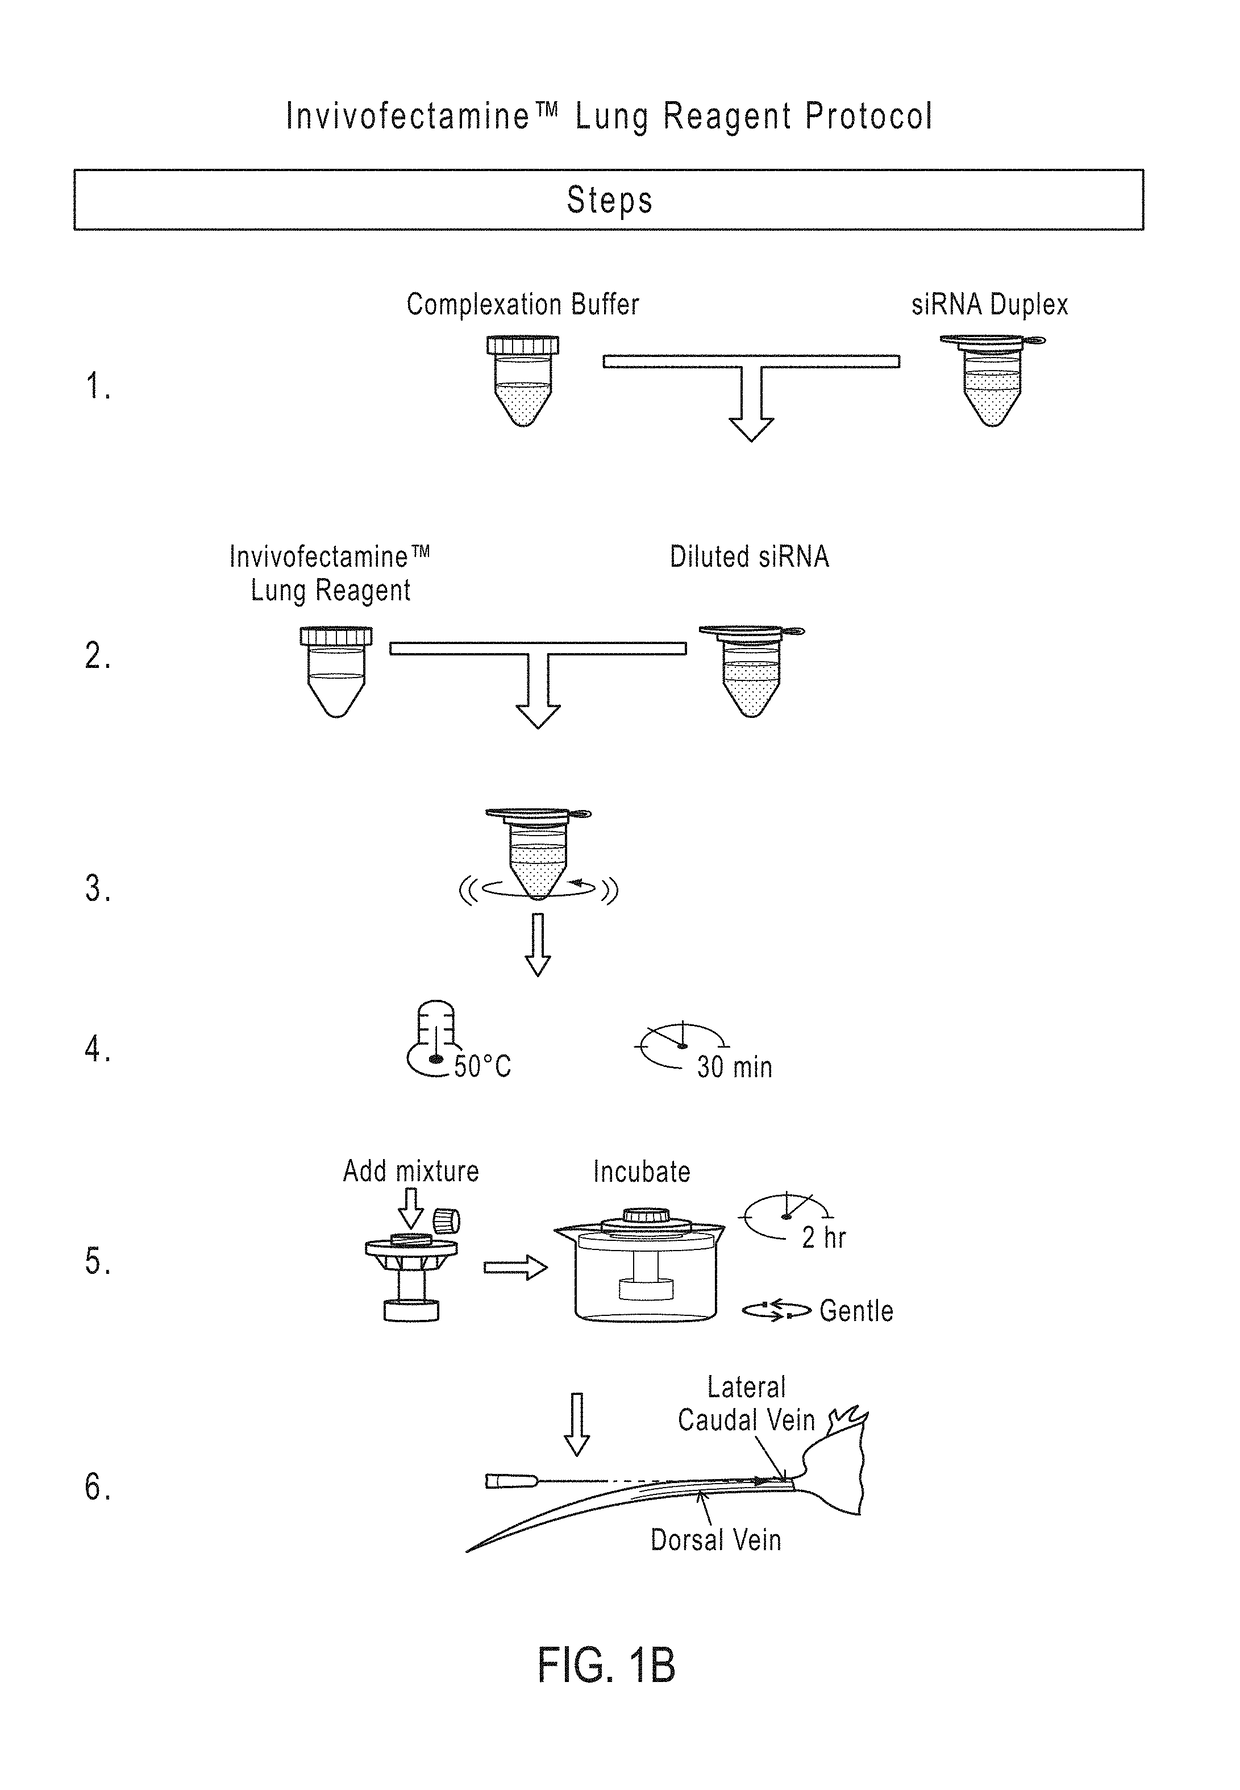 Cationic lipid compositions for tissue-specific delivery